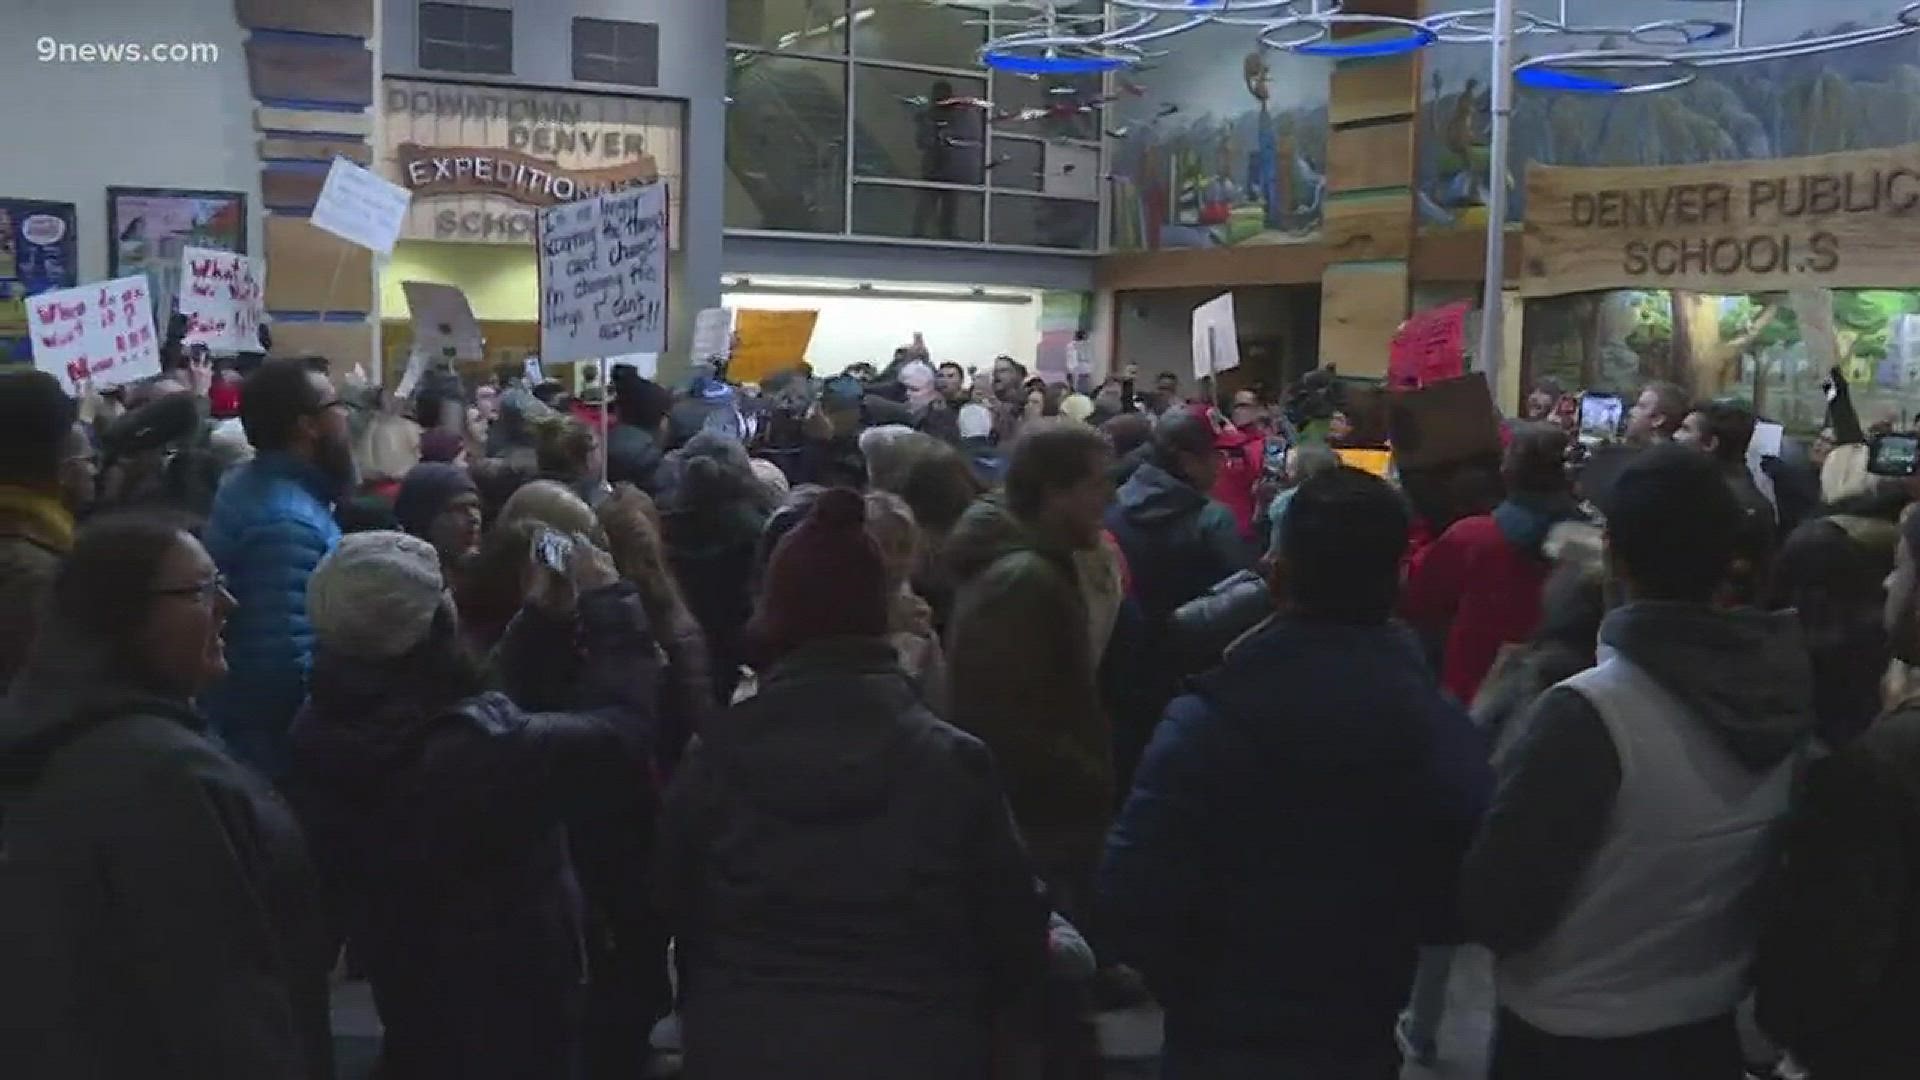 Teachers rallied outside district headquarters Thursday night, while the school board met inside, listening to teachers and parents talk about the strike.